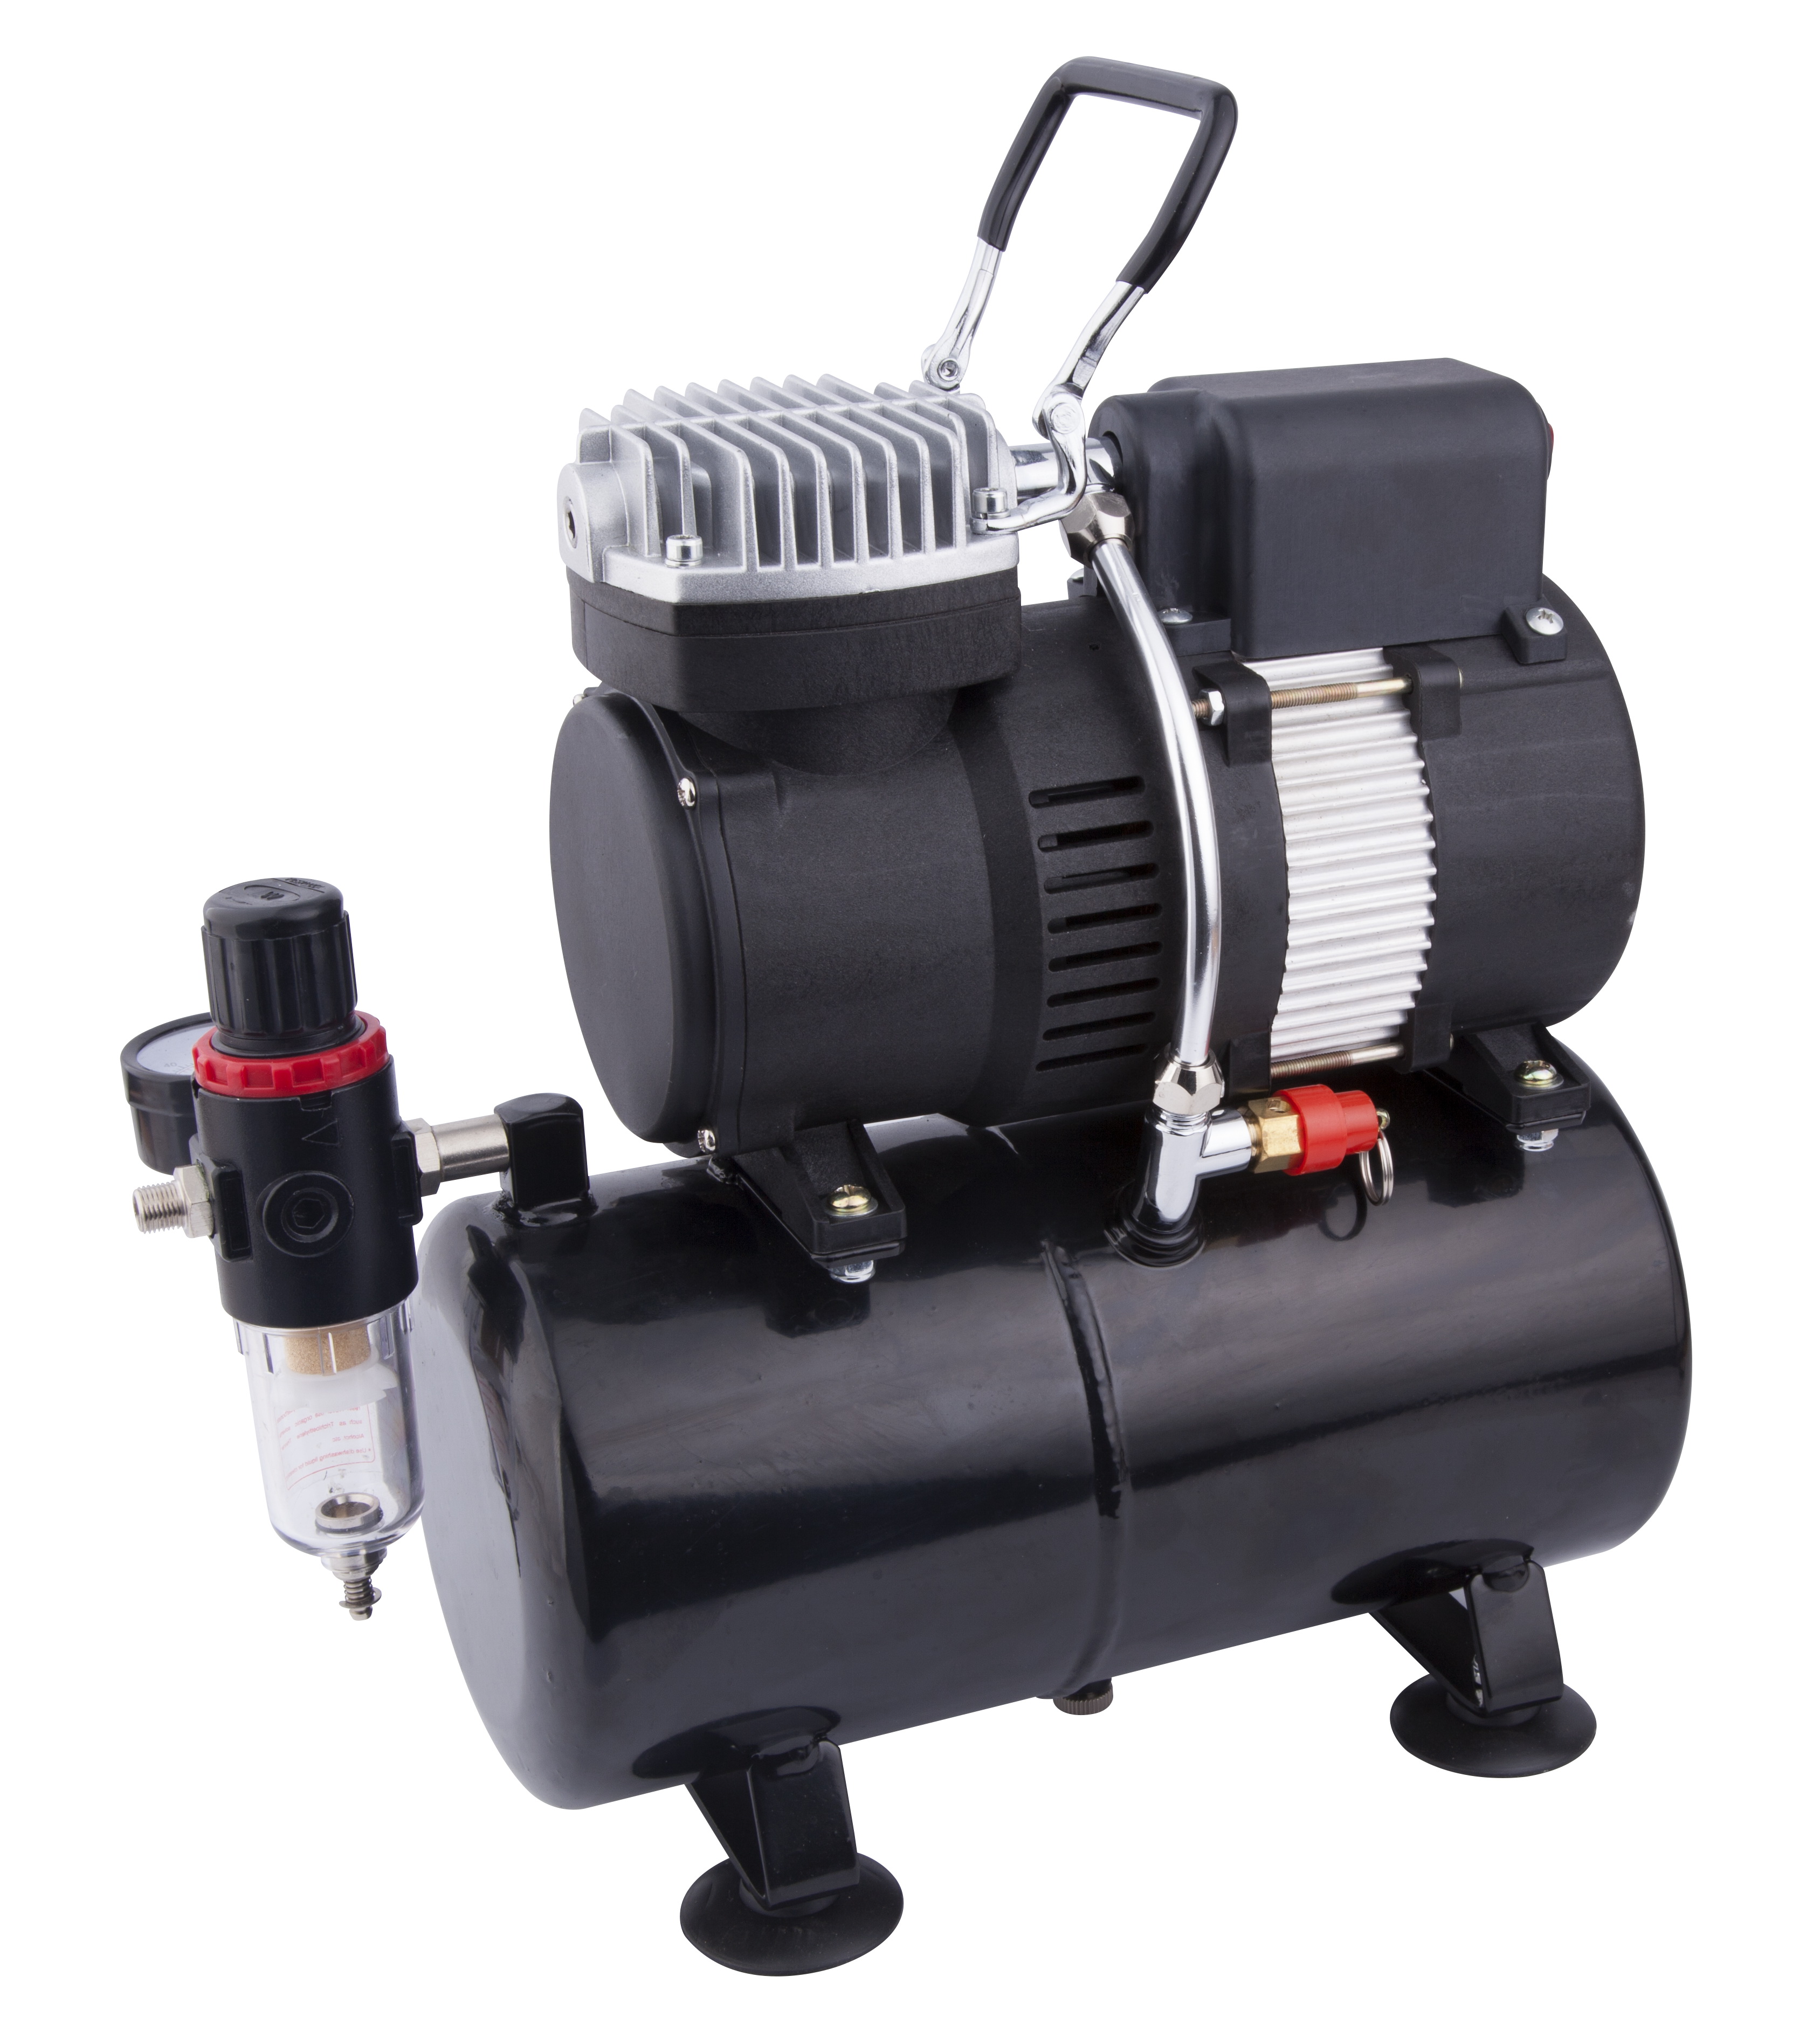 AG-326 Airbrush Airbrushing System with Cool Runner II Dual Fan Air Compressor  Pro Gravity Airbrush compressor